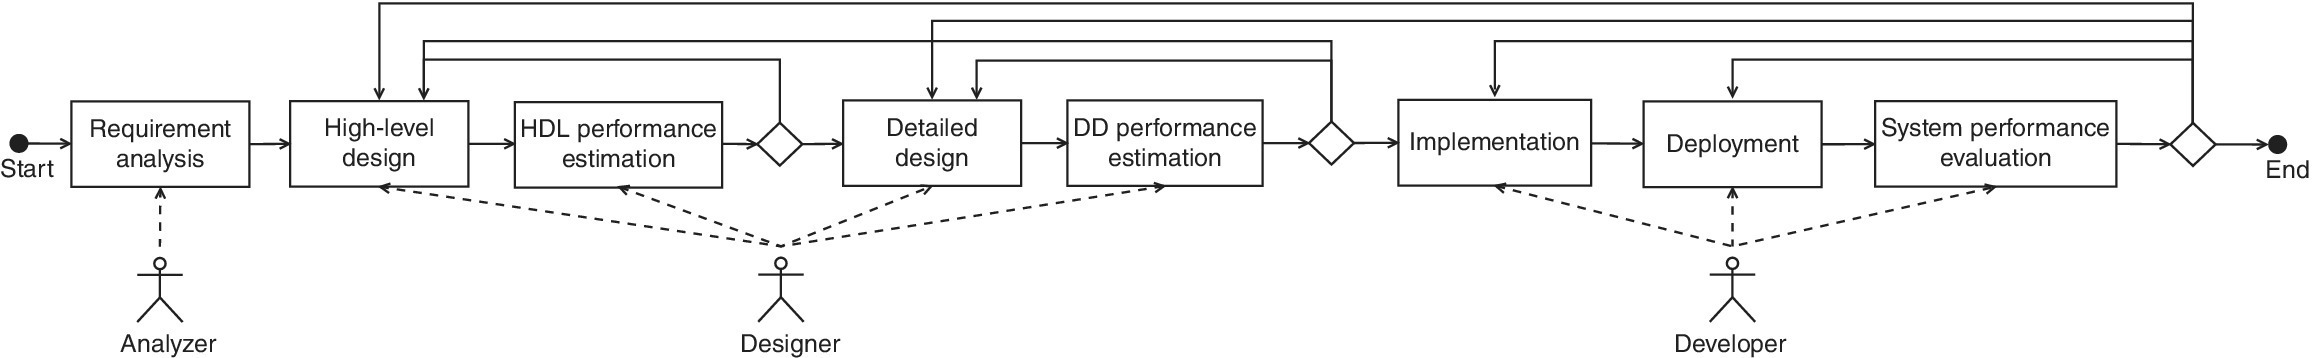 SPINE‐based platform design process with arrows connecting boxes from requirement analysis to system performance evaluation, with 3 stick figures labeled analyzer, designer, and developer connected to the boxes.